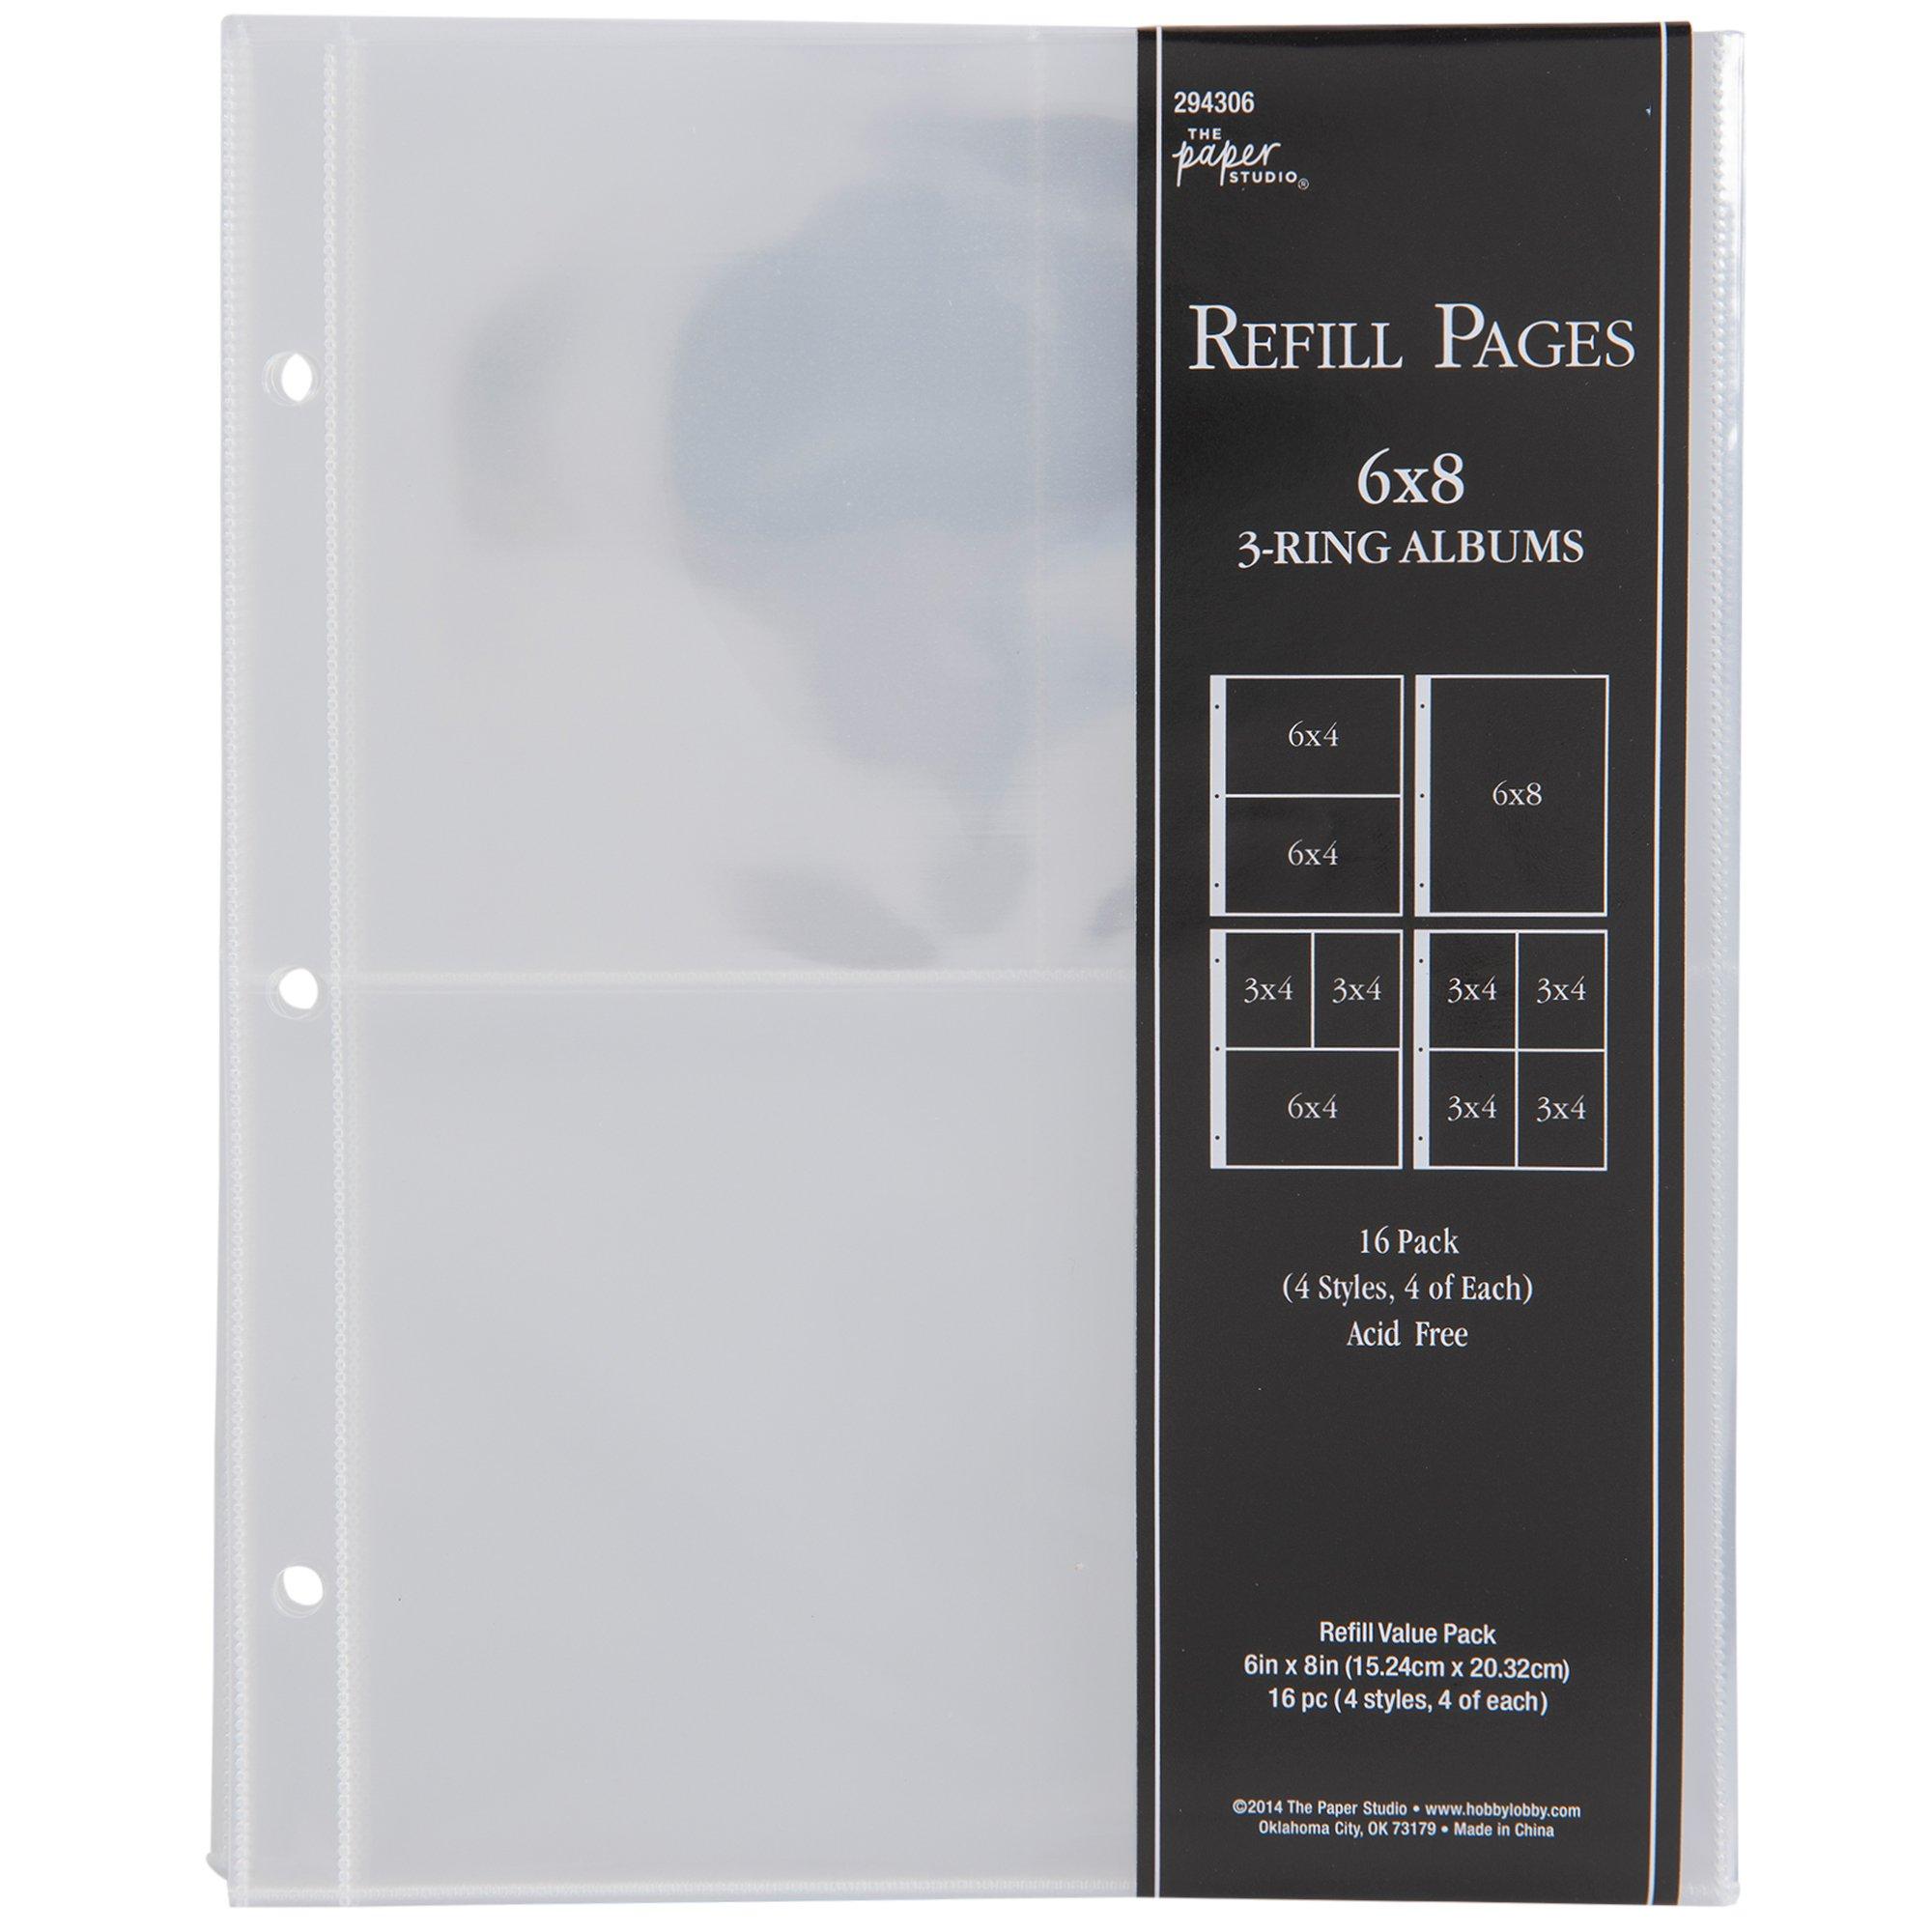 Refill pages - Multi-Size Photo Album (#3Large)